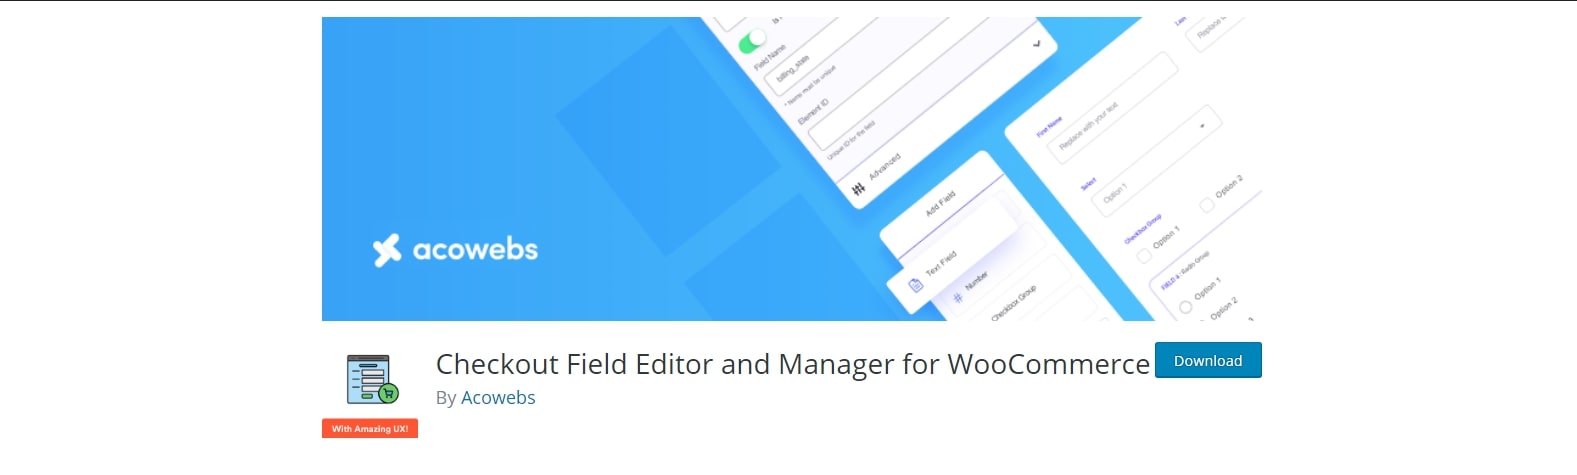 Checkout Field Editor and Manager by Acowebs